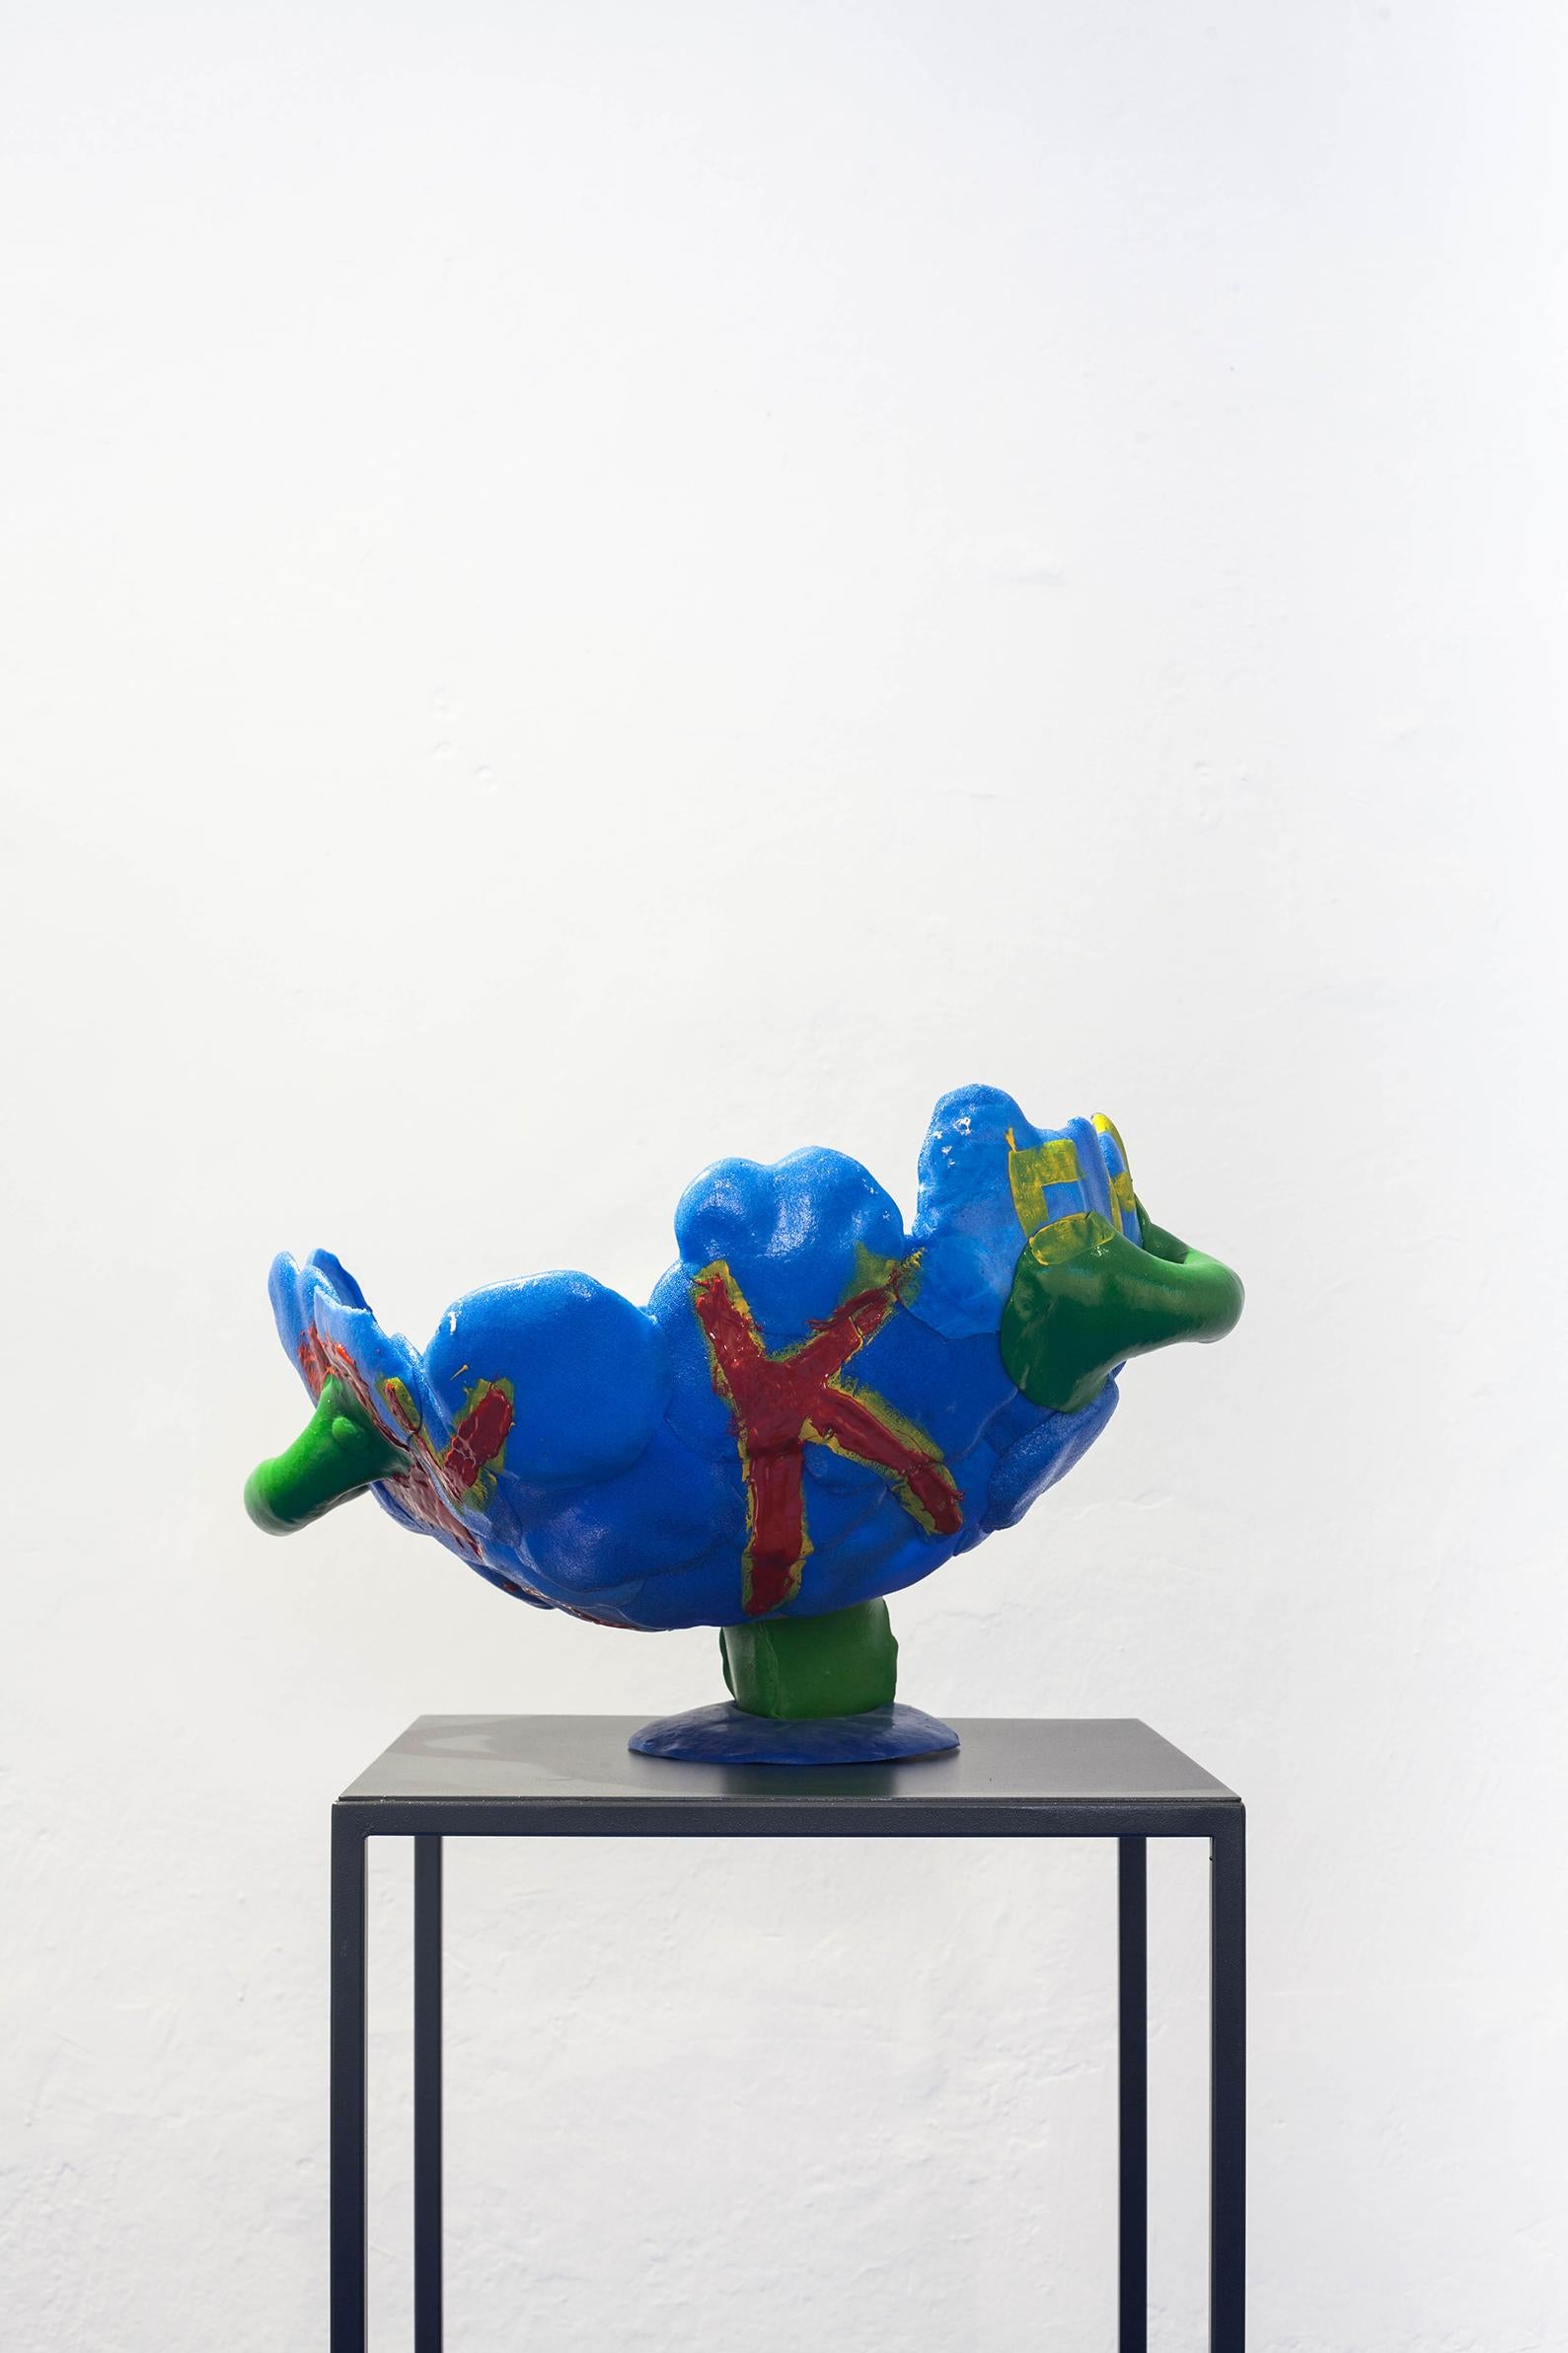 Matteo Pellegrino
vase blue, 2017

Polyurethane foam, epoxy resin
44 x 40 x H 33 cm

Unique piece with signed certification
2017
Italy

For Matteo Pellegrino the direct manipulation of matter - mainly resins, silicones and plastics - is